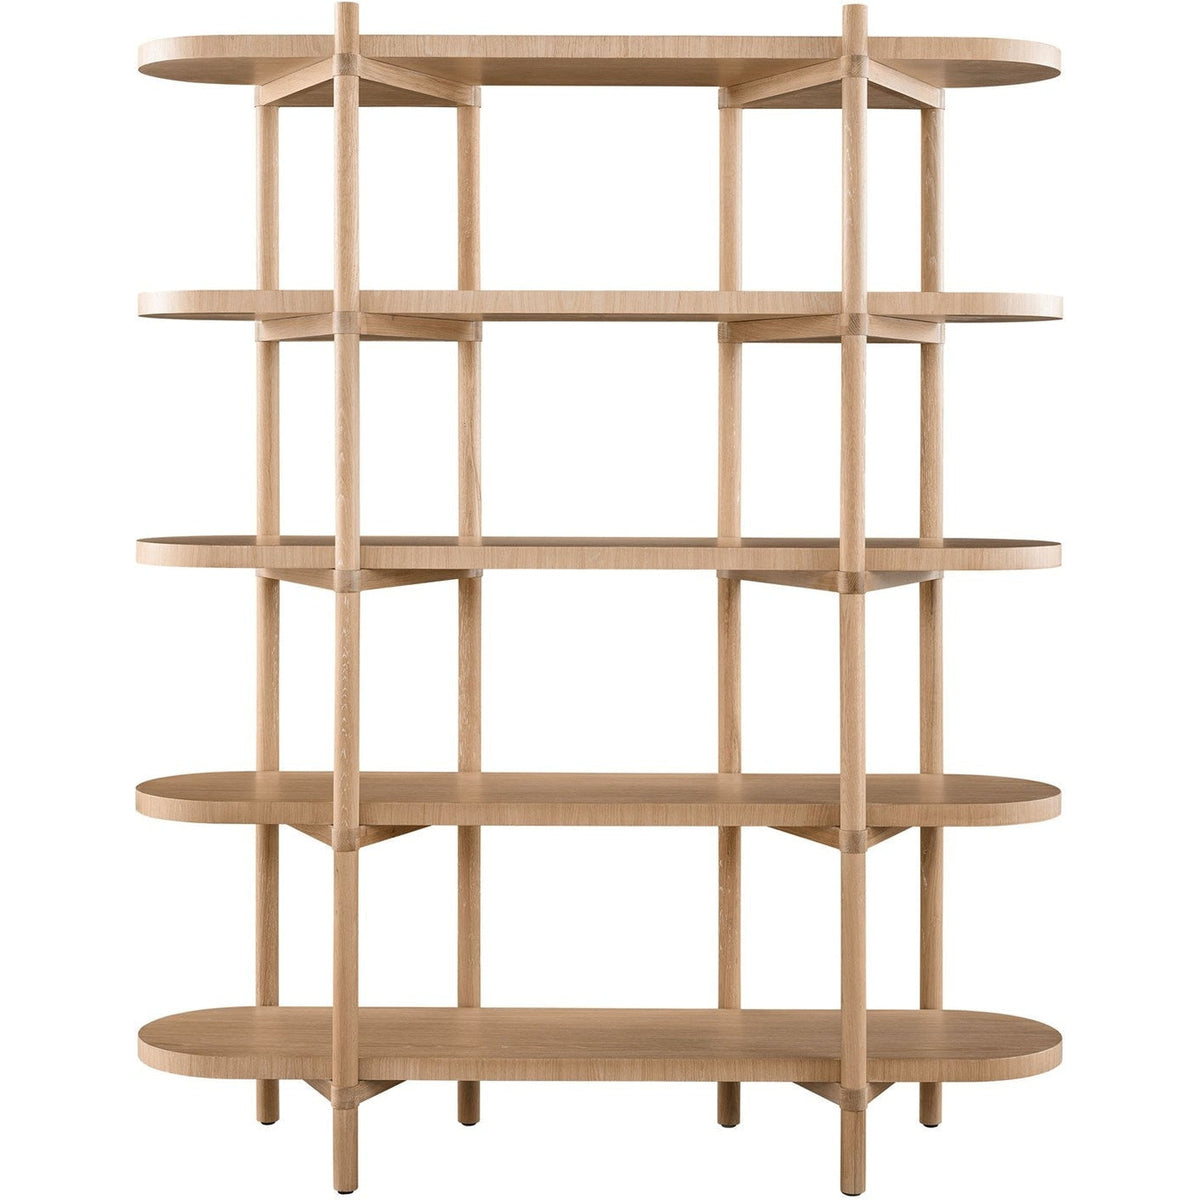 Two Tier Wood Caddy - Kitchen Organizer - The Nomad Studio